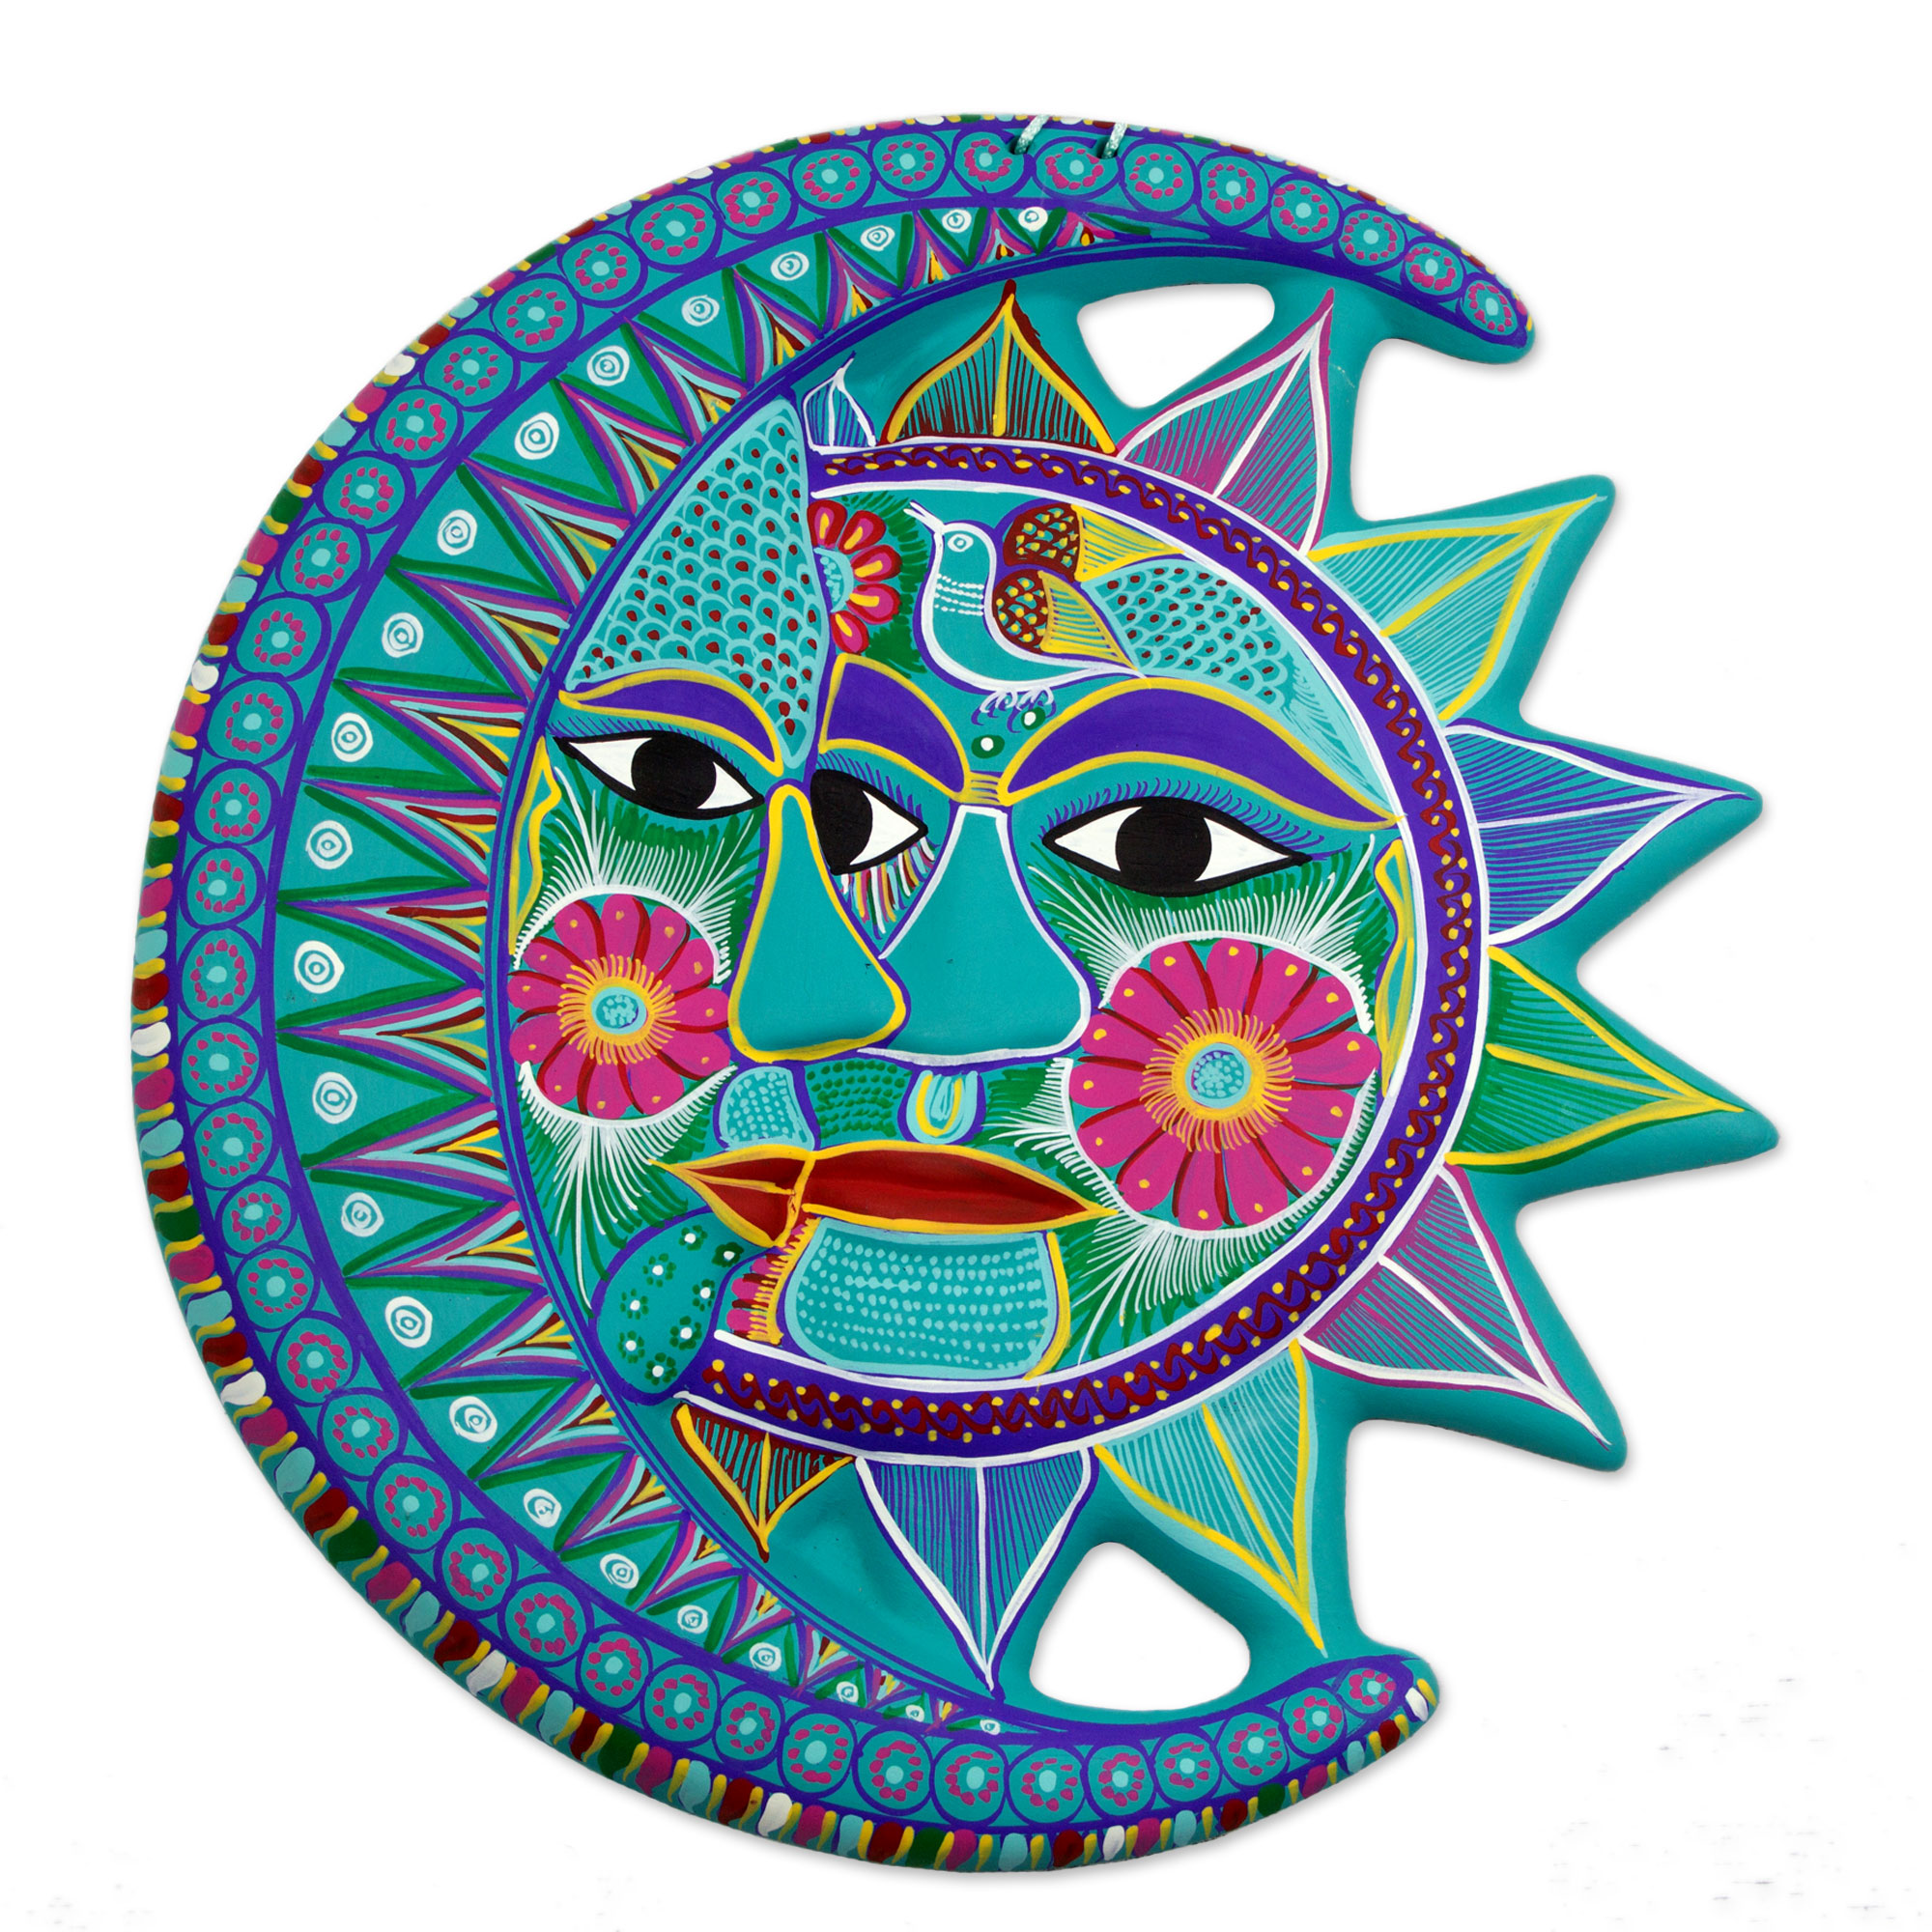 MEXICAN SUN AND MOON WALL ART - Unique Mexican Sun and Moon Wall ...